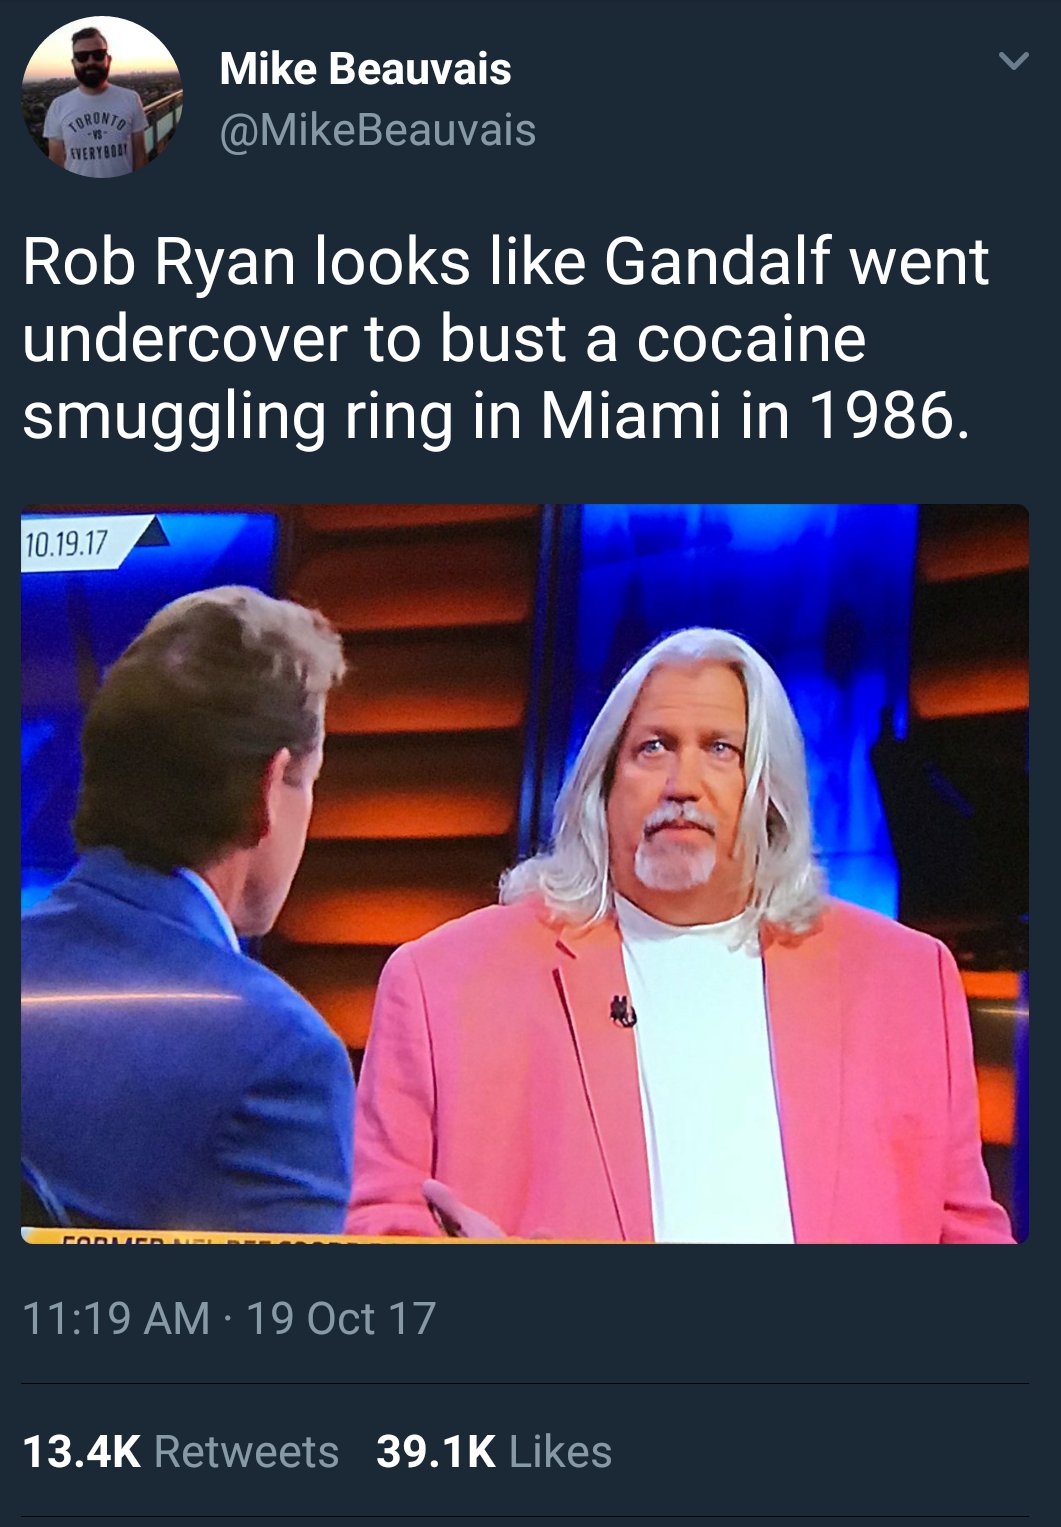 rob ryan miami vice - Mike Beauvais Toronto Everybolt Rob Ryan looks Gandalf went undercover to bust a cocaine smuggling ring in Miami in 1986. 10.19.17 19 Oct 17